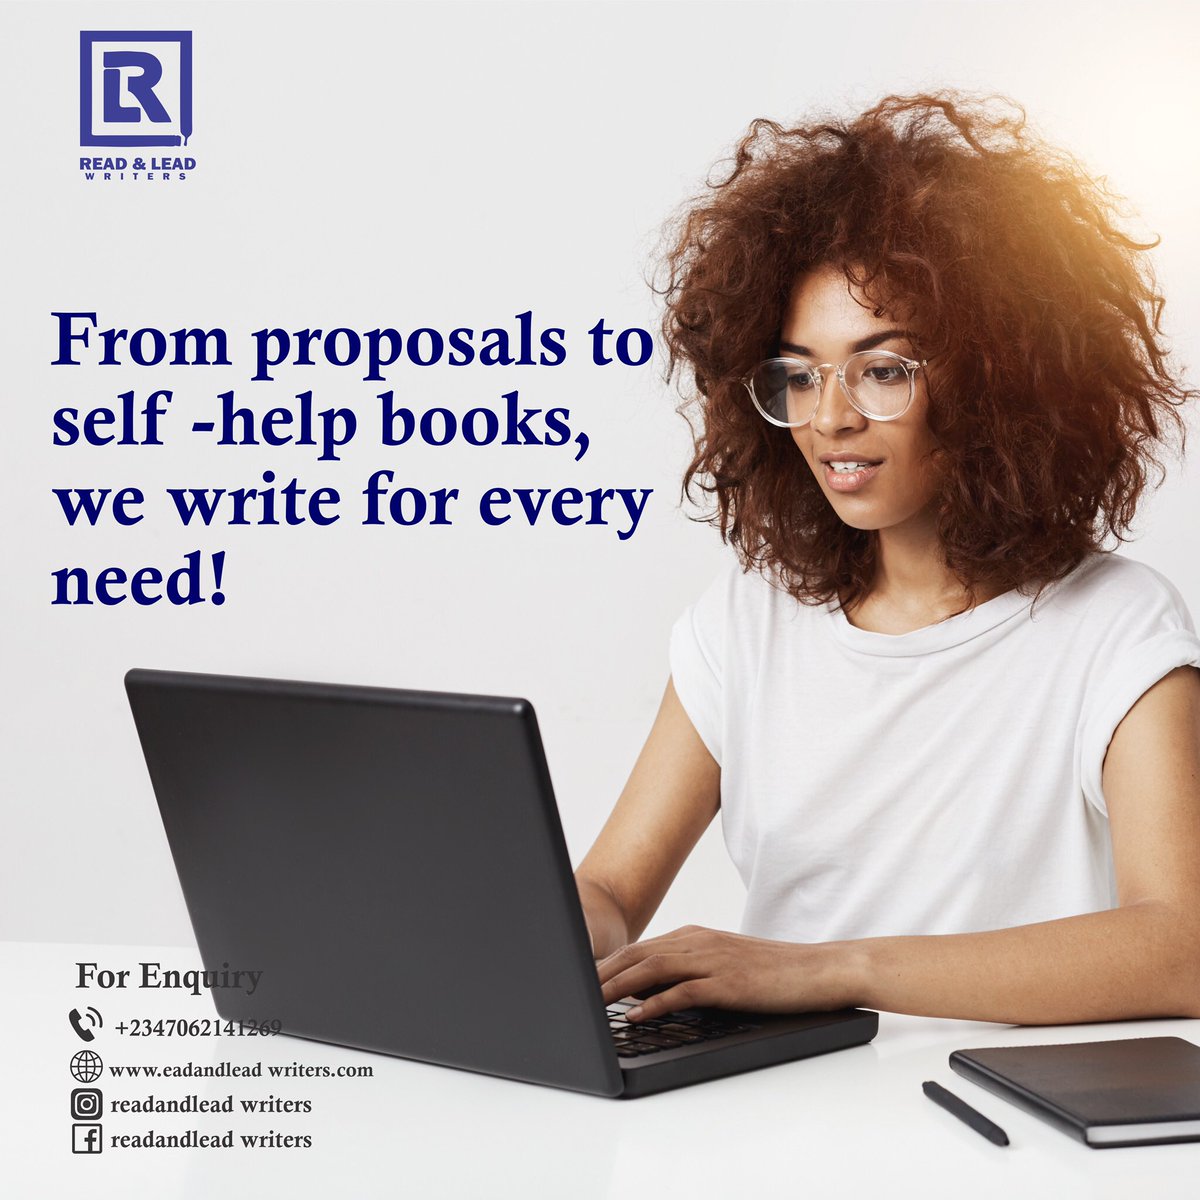 What kind of writing are you struggling with?

Let’s make it happen for you.

You can trust us with all your writing needs.

Call/WhatsApp 07062141269 to get started.

#proposalwriting #proposalwriter #businesswriting #businesswriter #Readandleadwriters #writingservices #wri